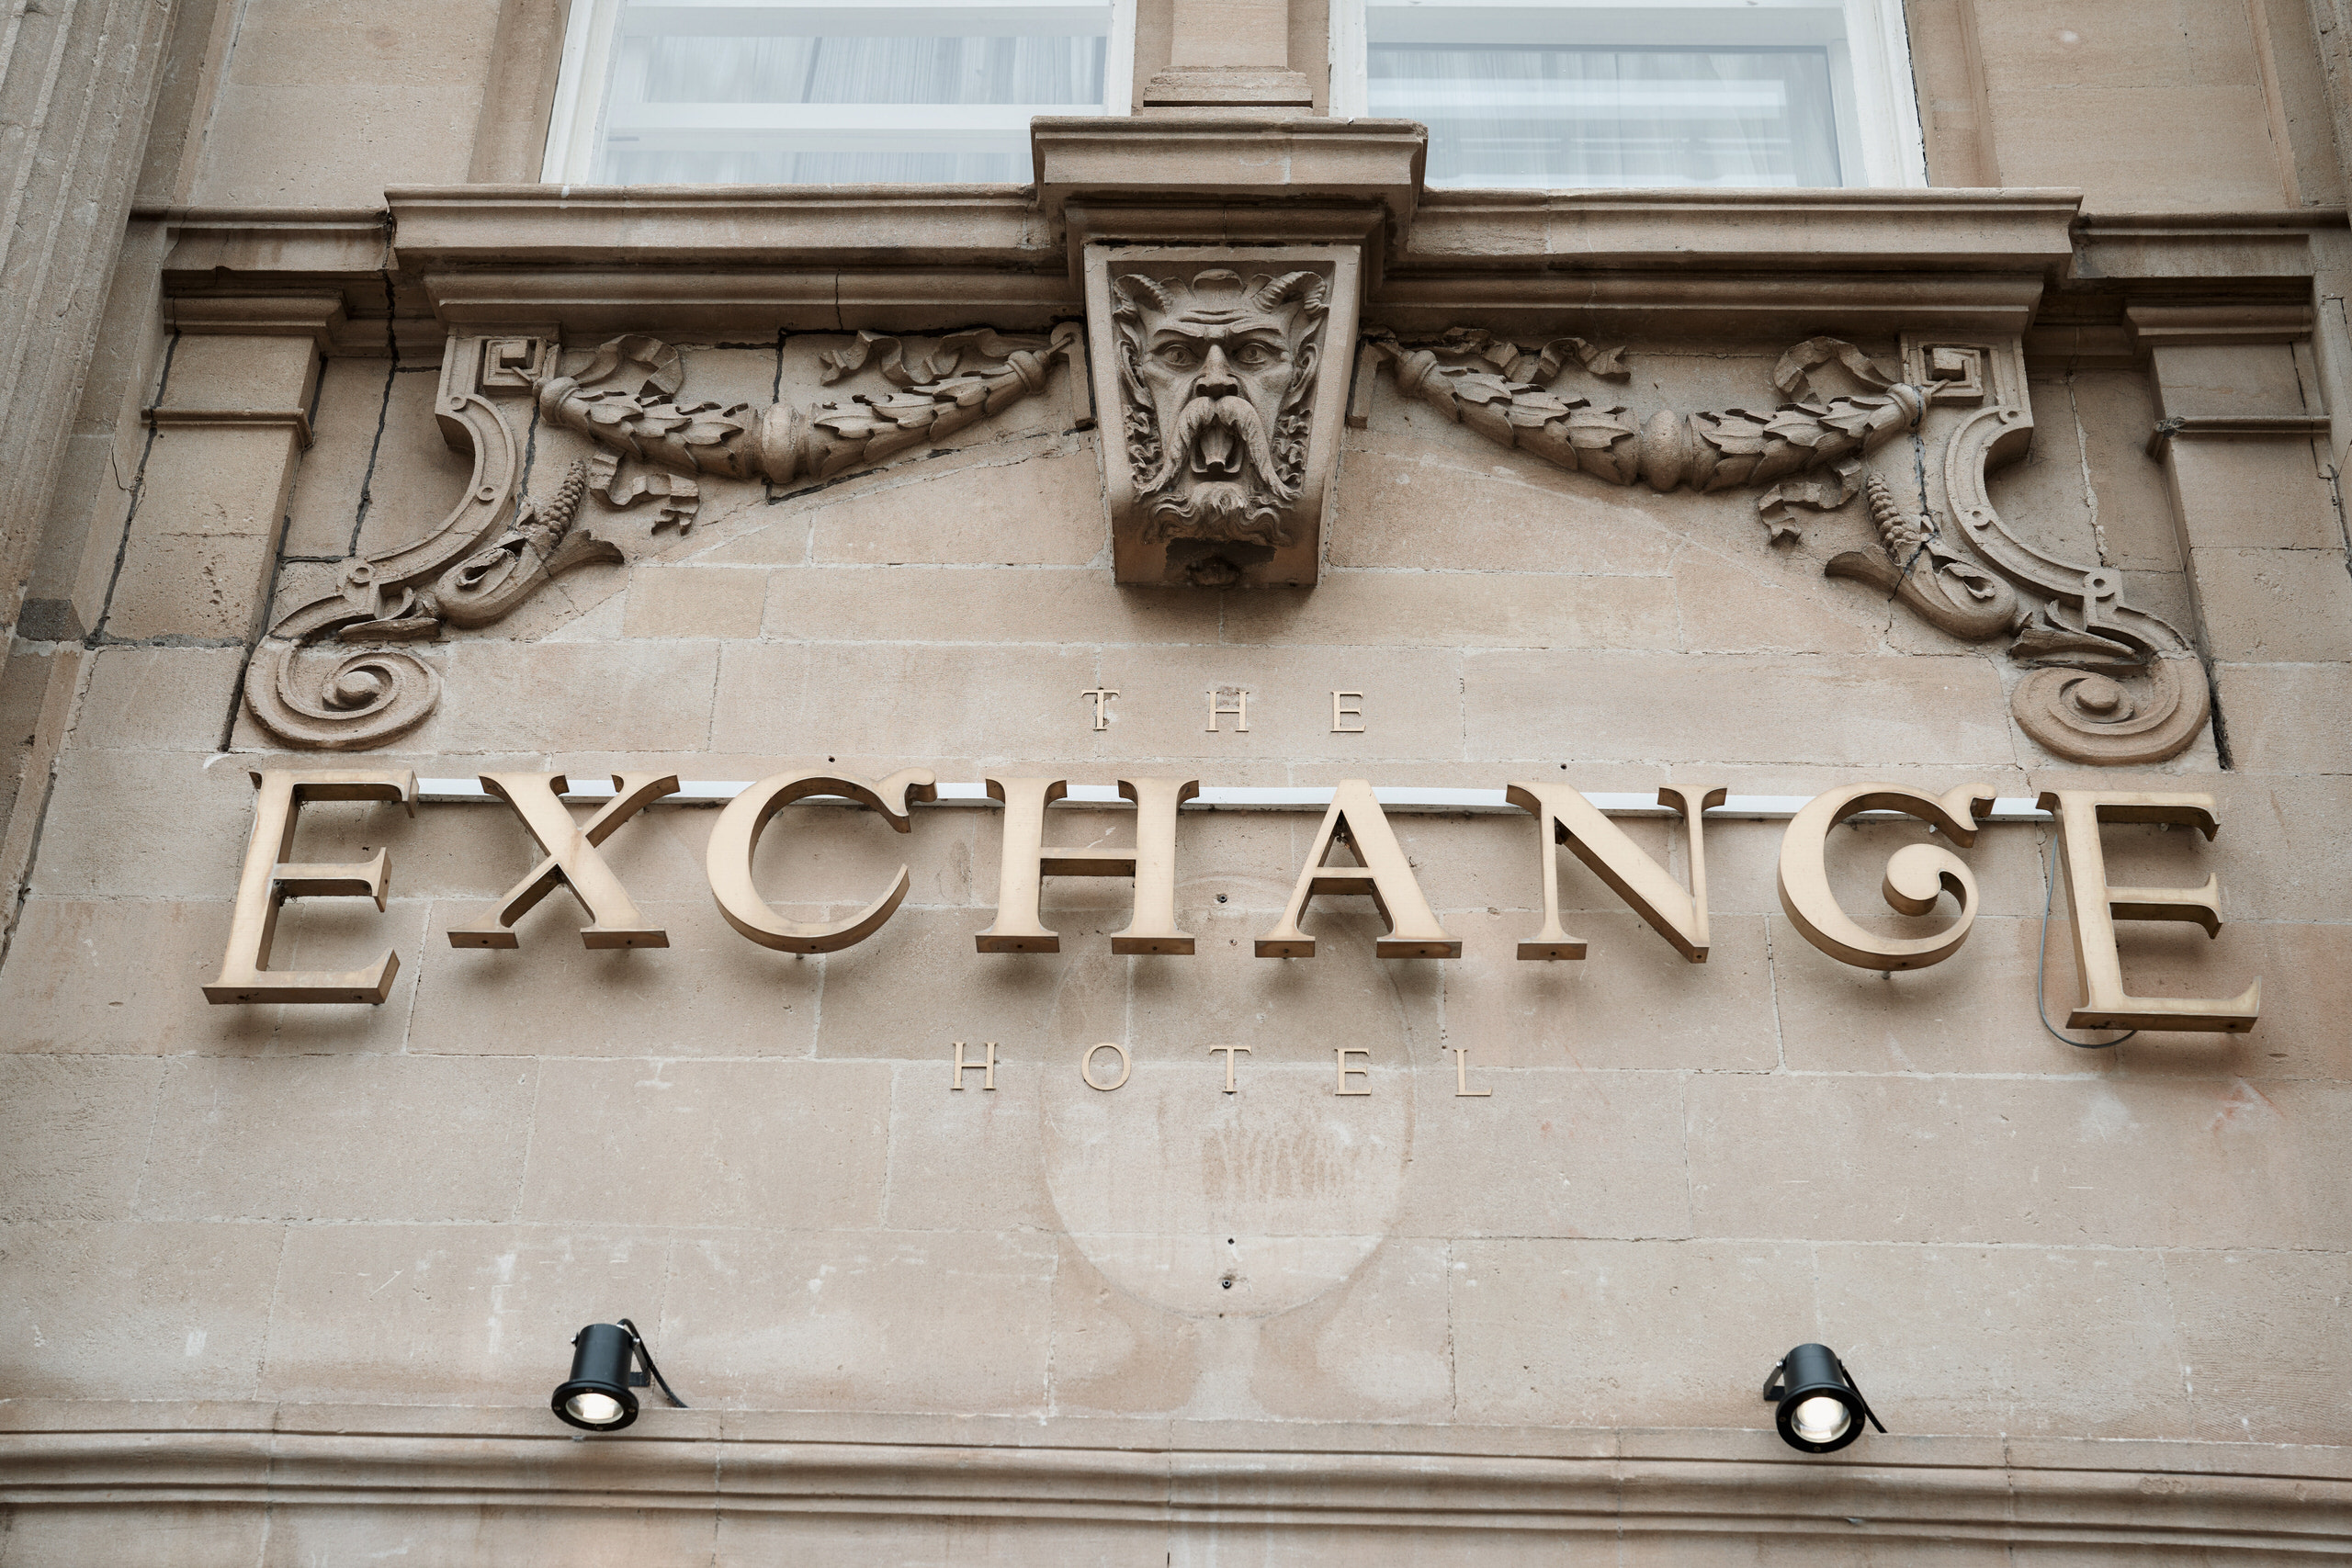 The hotel known as "The Exchange" in Glasgow.